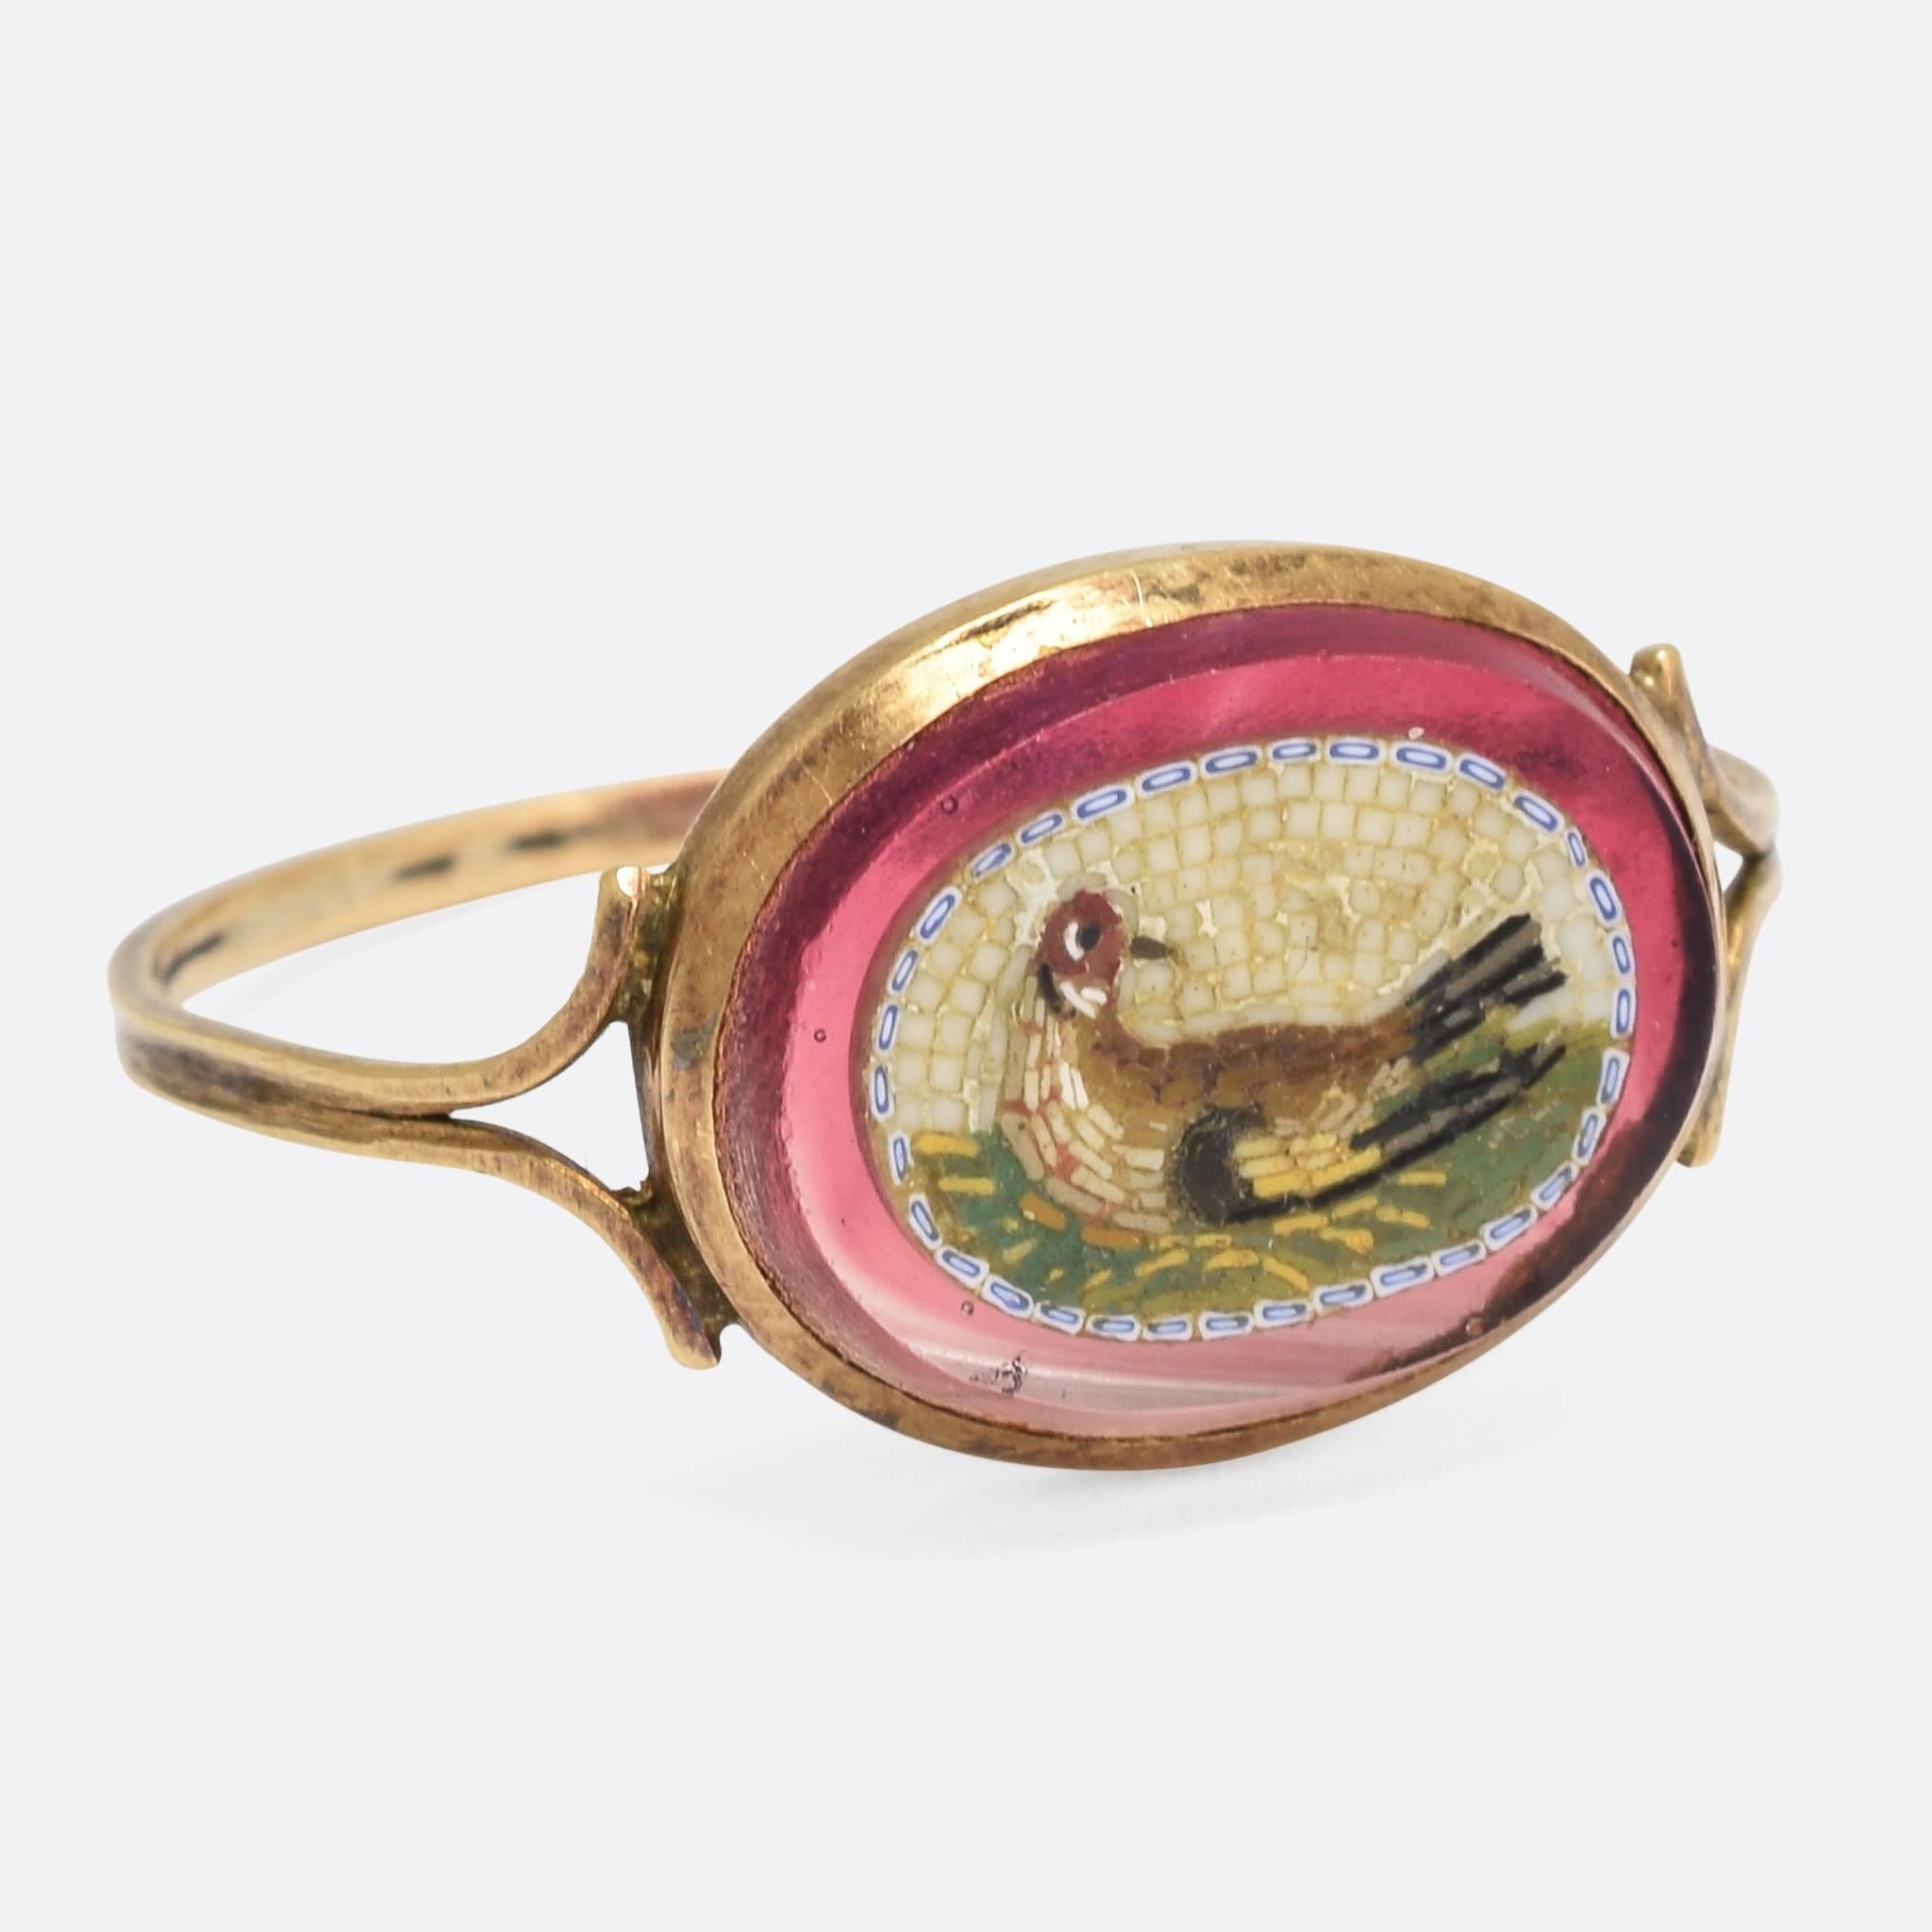 A fine quality Georgian period 15k gold ring, bezel set with an incredibly detailed micromosaic panel depicting a Goldfinch. 
